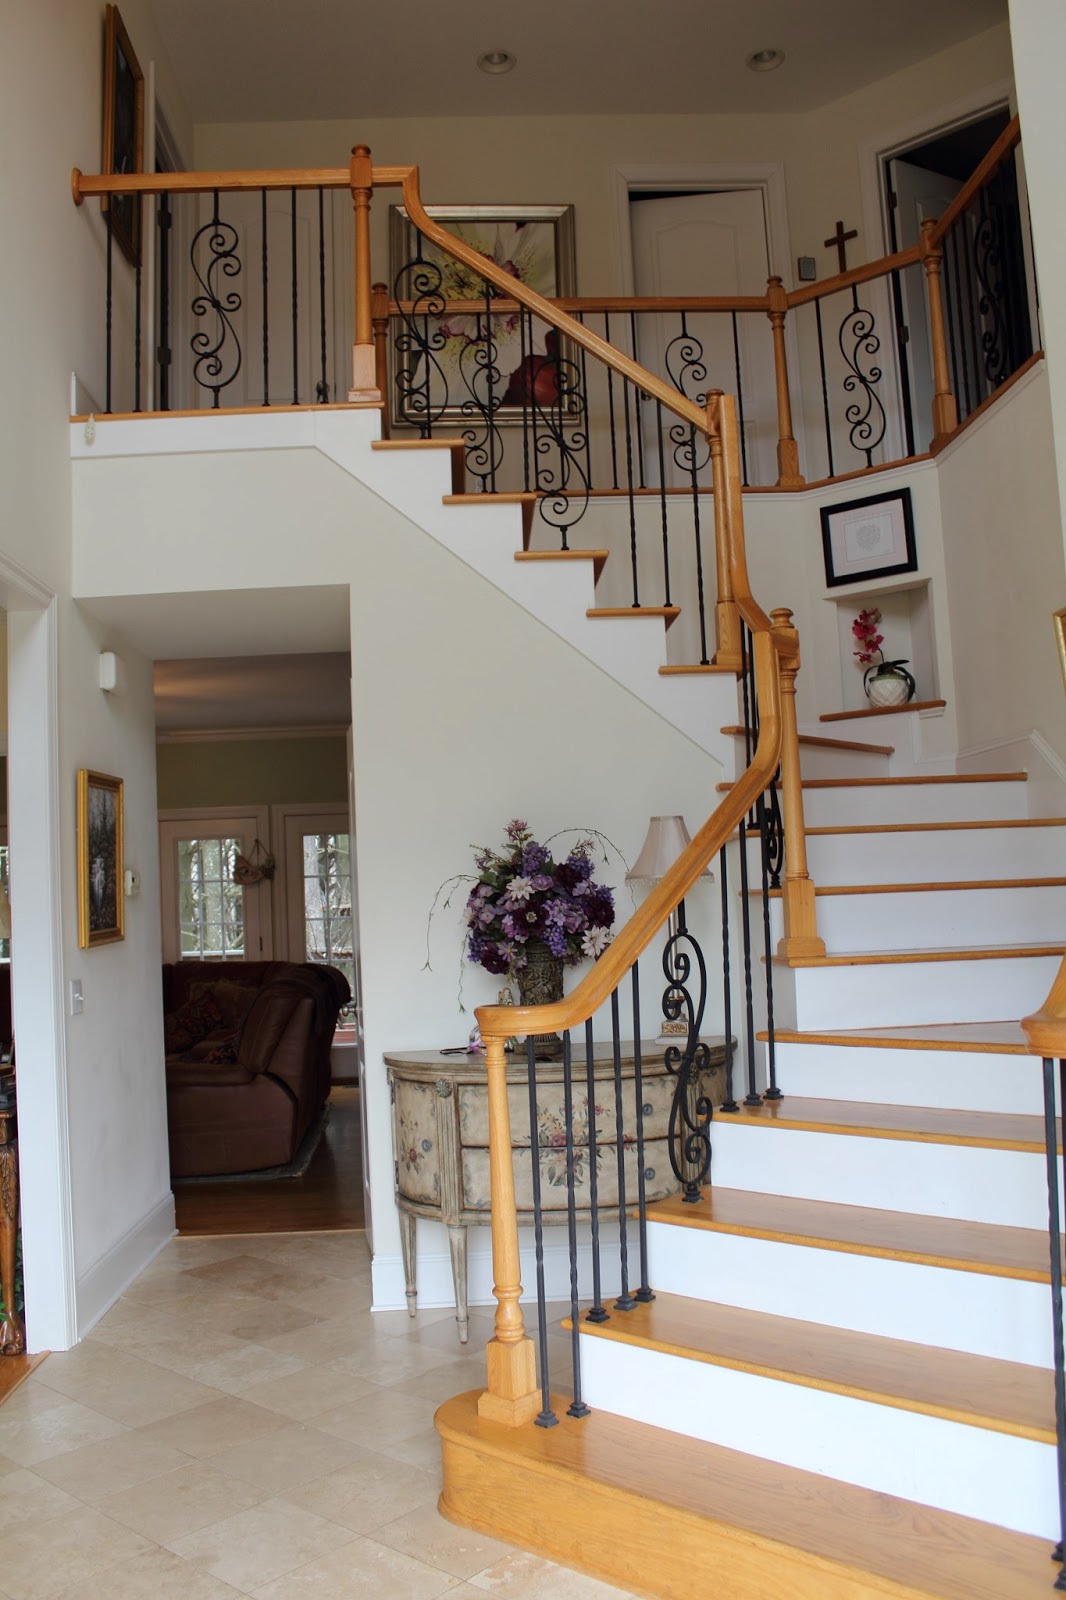 Sewanee Tennessee Home For Sale Foyer And Stairway To The Top